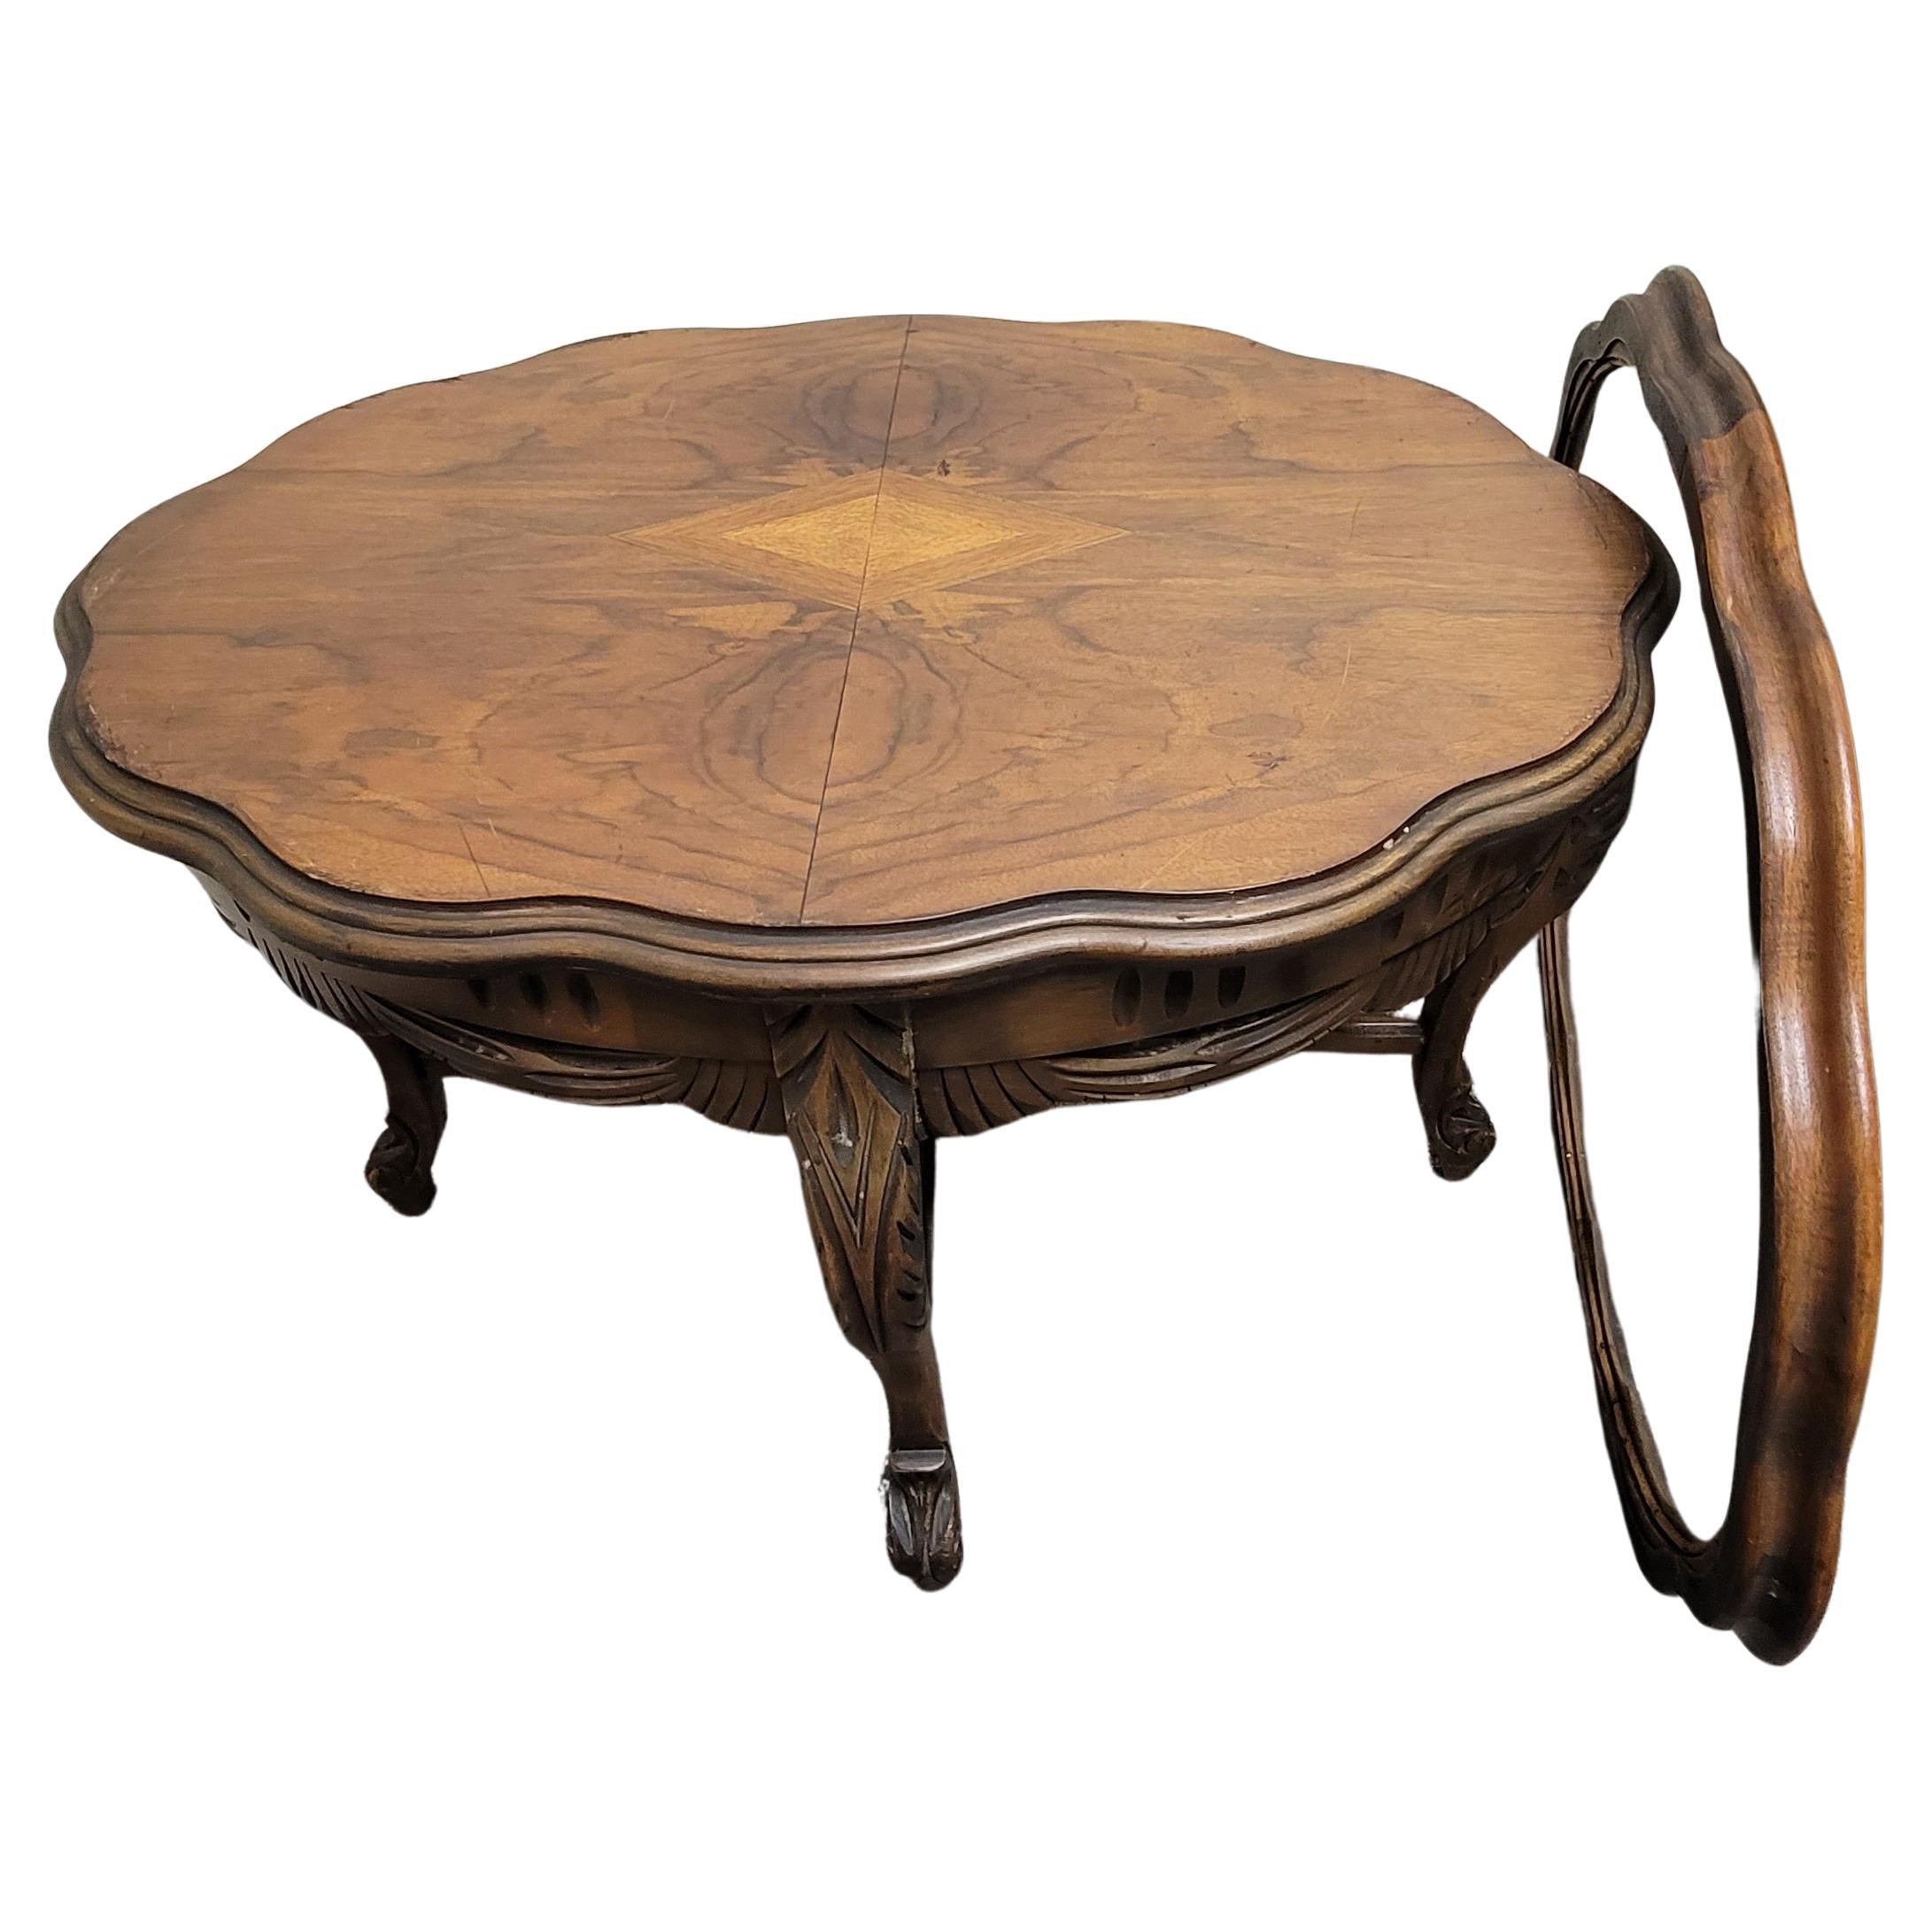 Rococo Revival 1950s Rococo Style Carved and Burled Walnut Glass Tray Top Oval Side Table For Sale